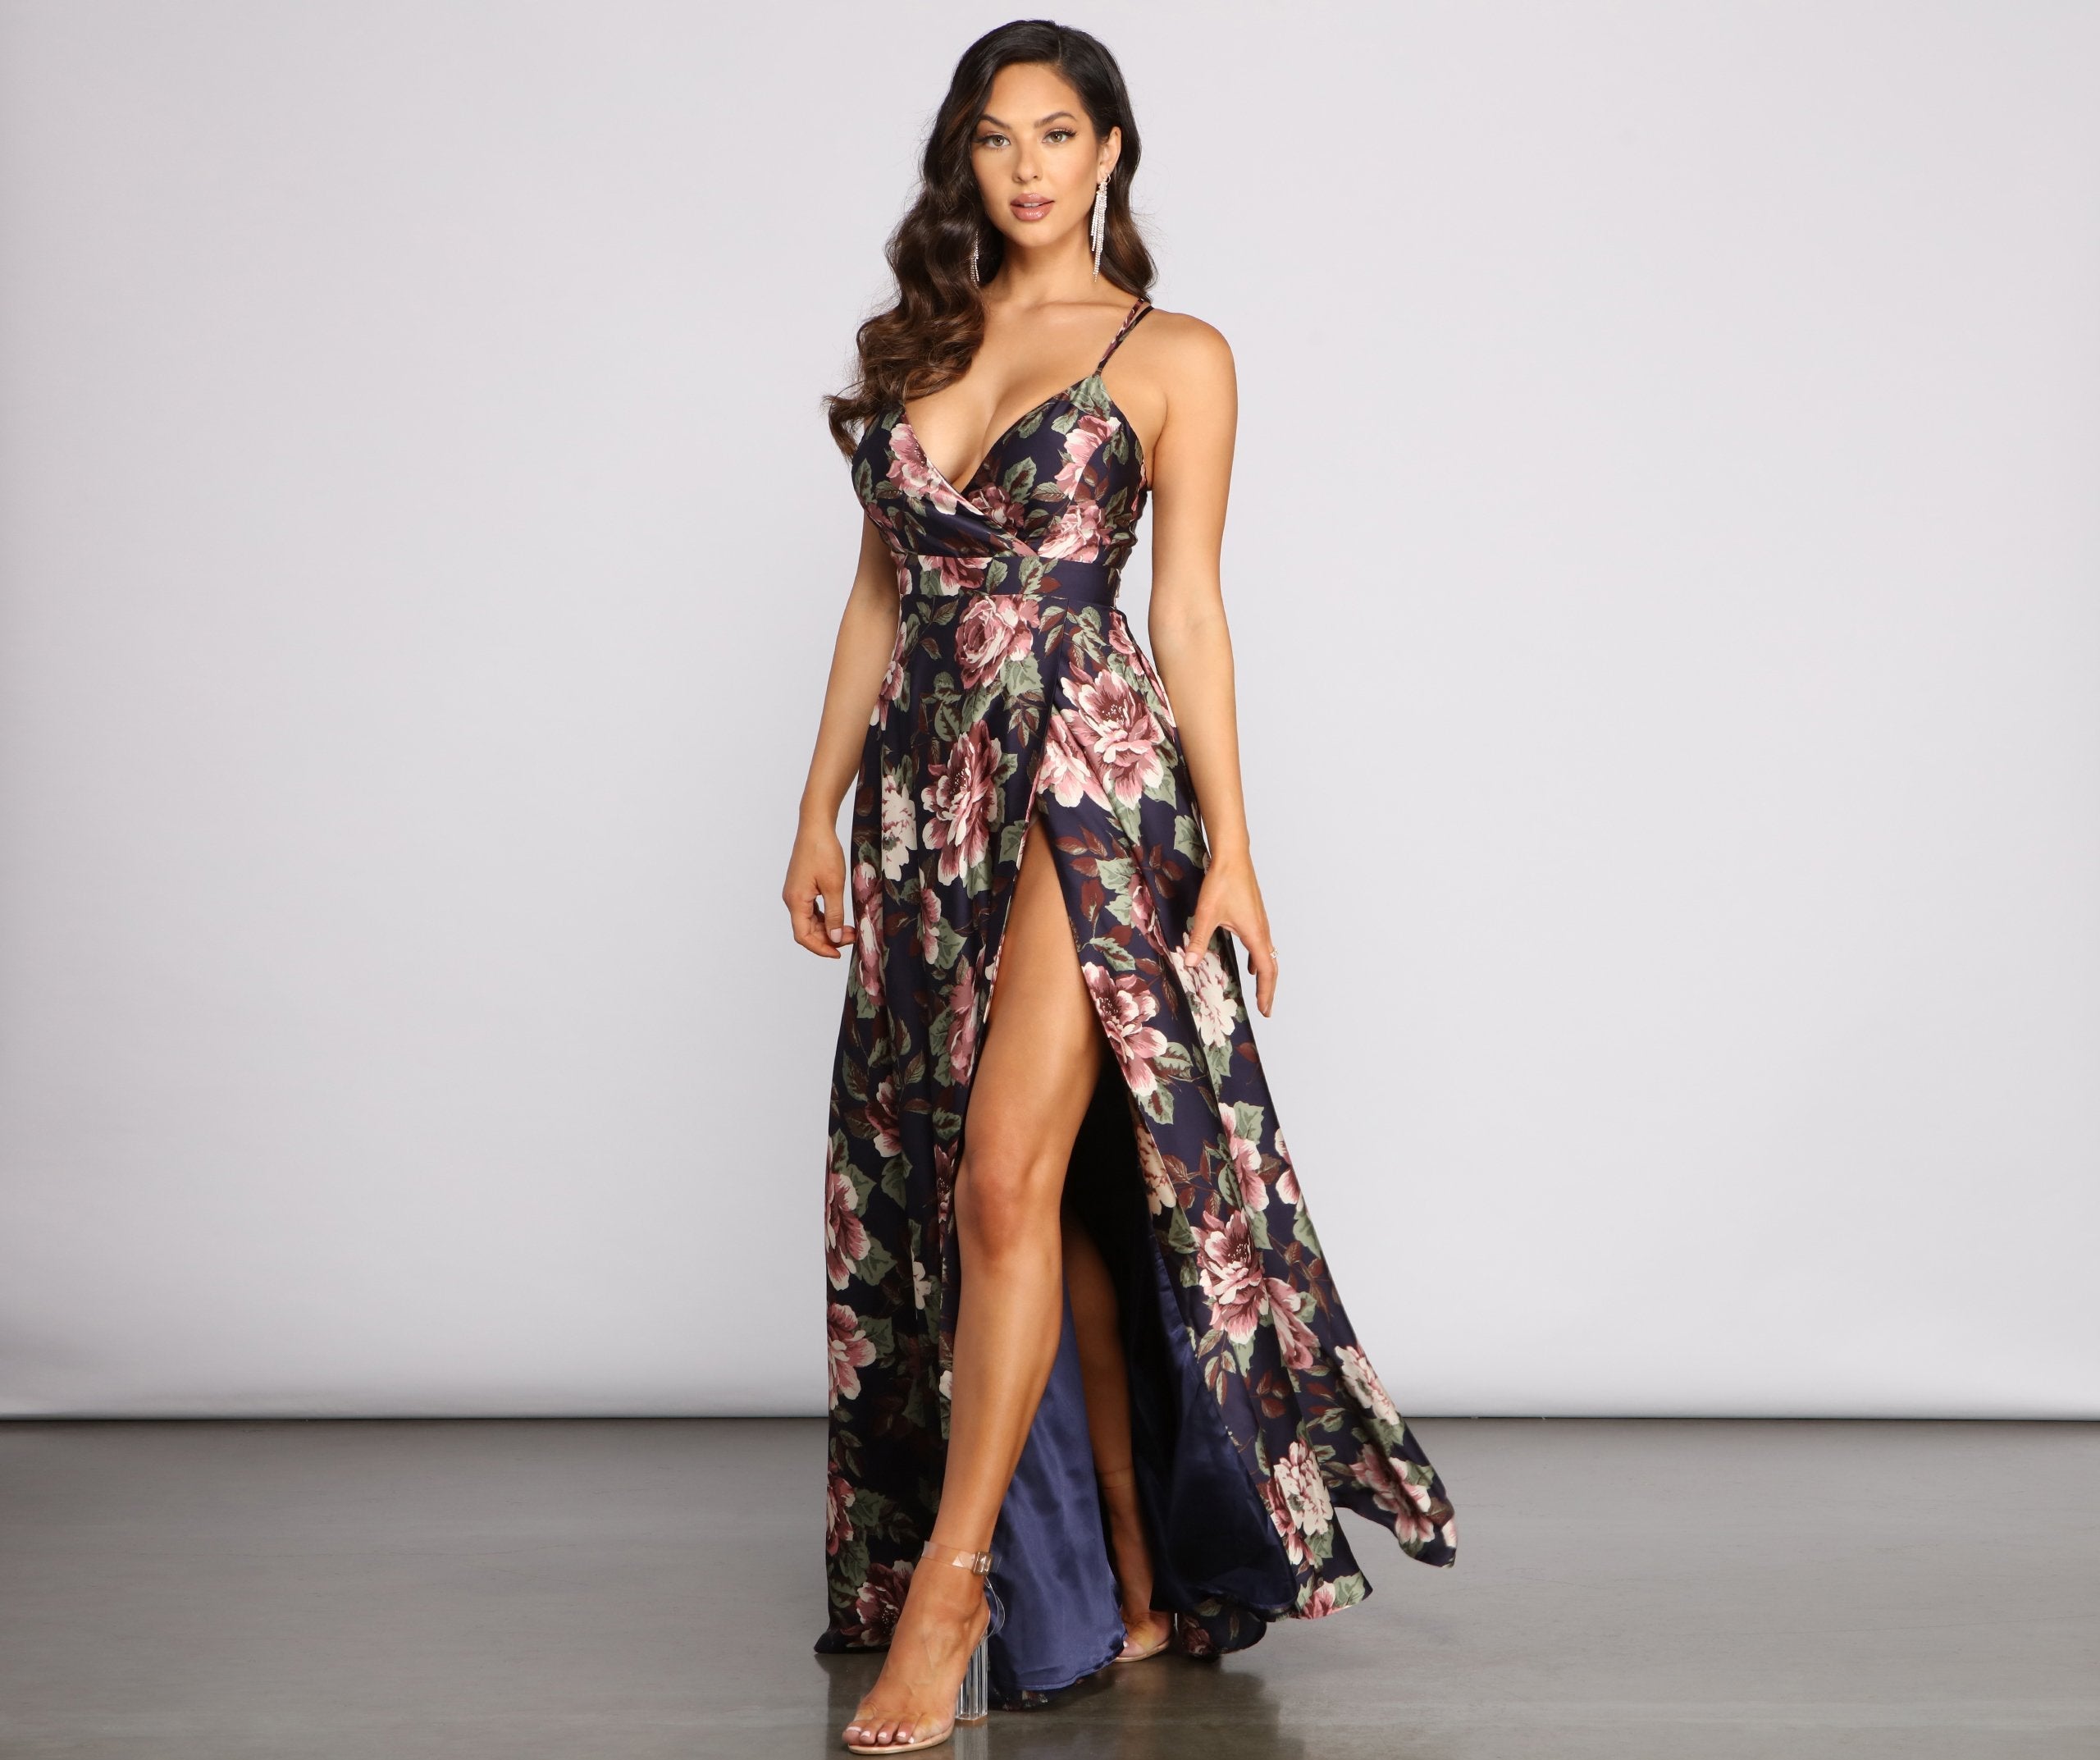 Betty Formal Floral A-Line Dress